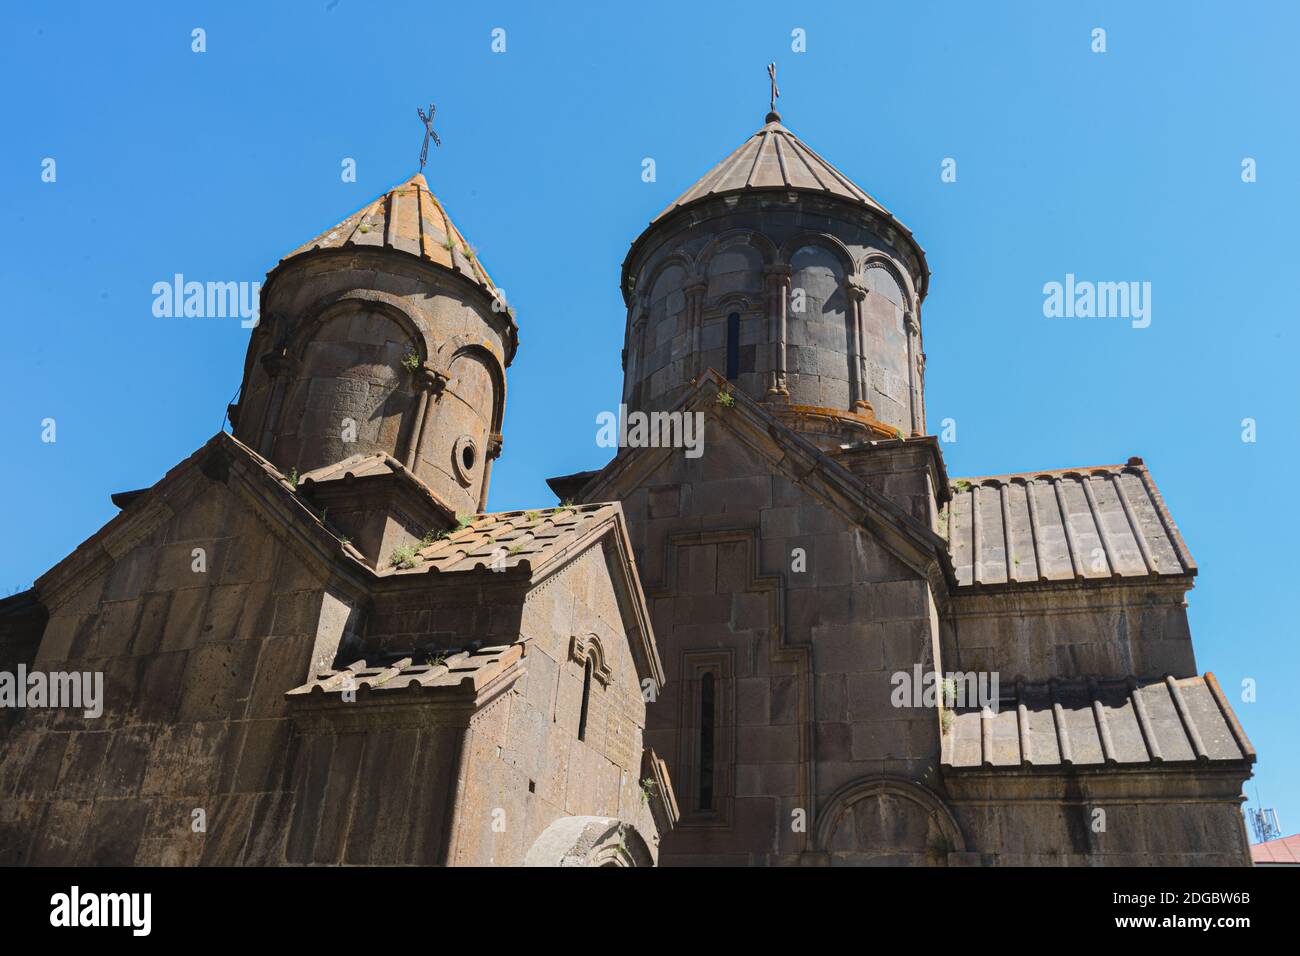 The outside view of the upper part of Surp Grigor & Katoghike churches inside the Kecharis medieval (11th century) monastic complex in Armenia Stock Photo